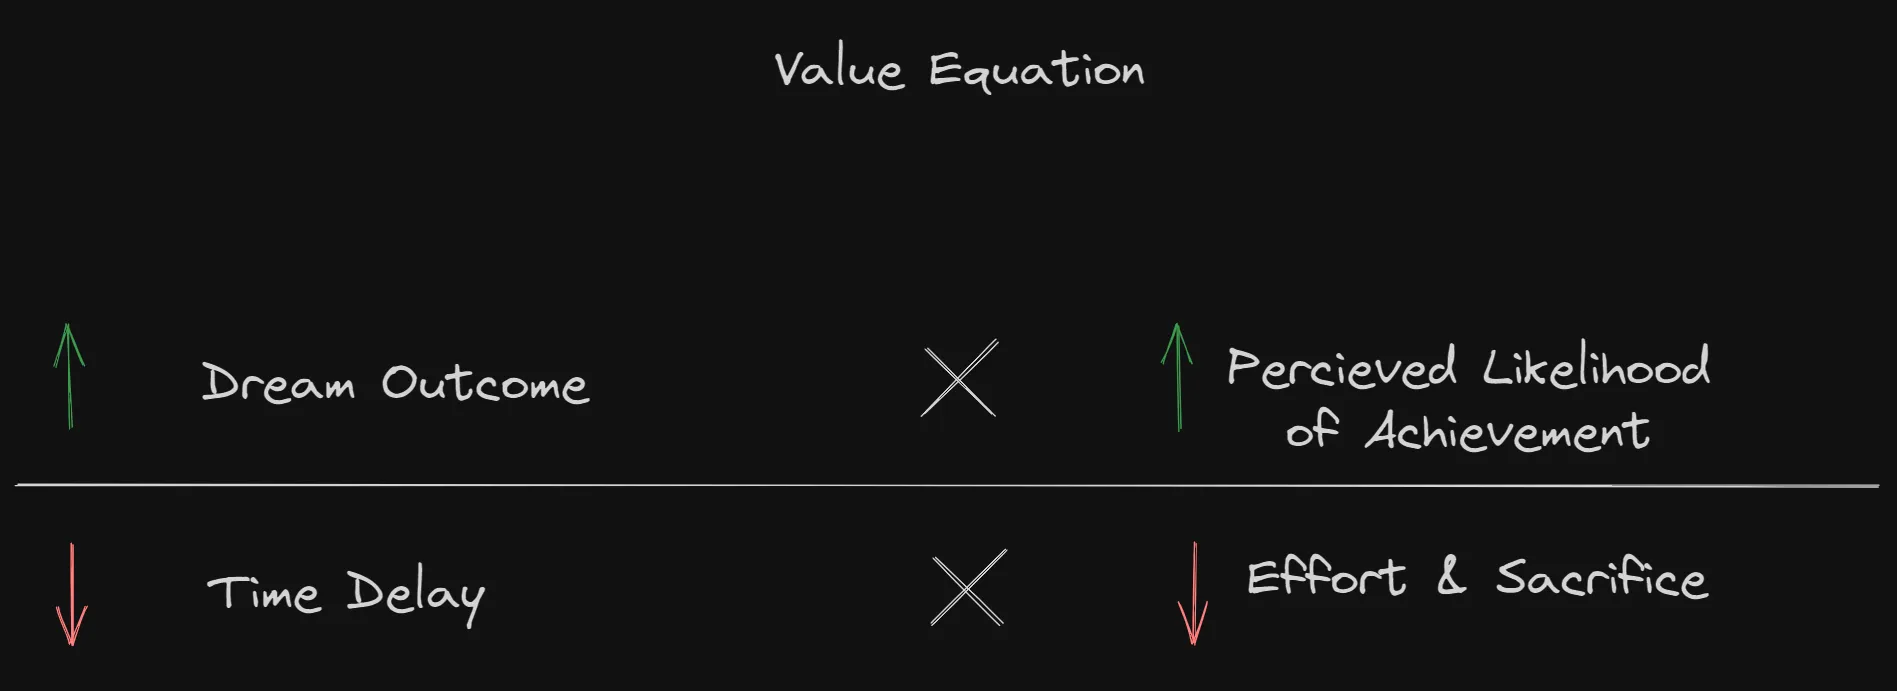 The value equation